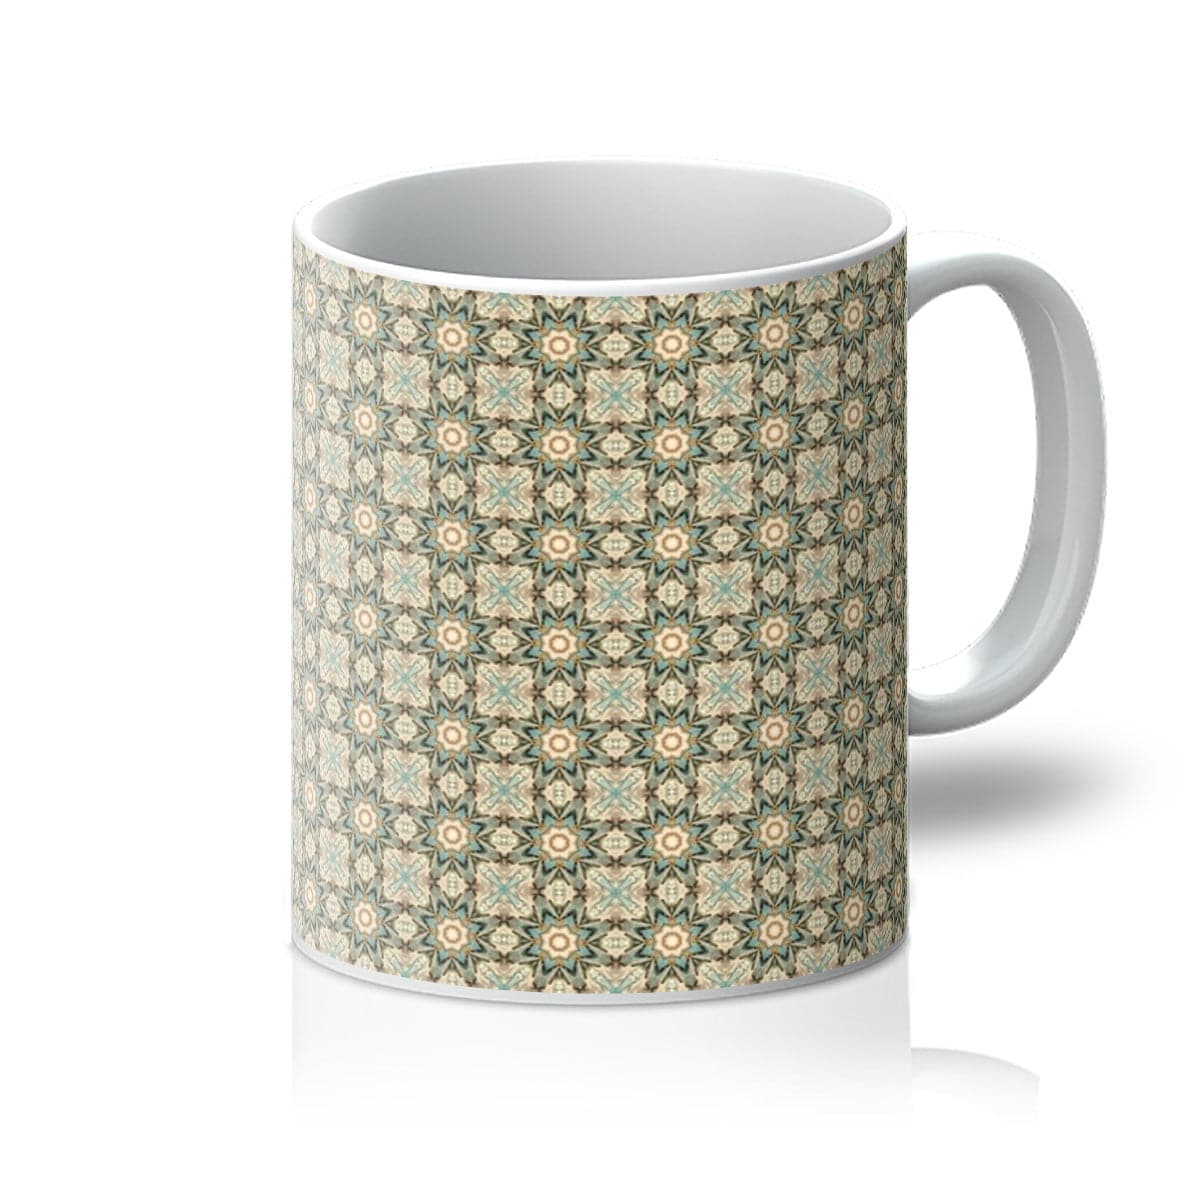 Sophiticated blue and beige pattern Mug